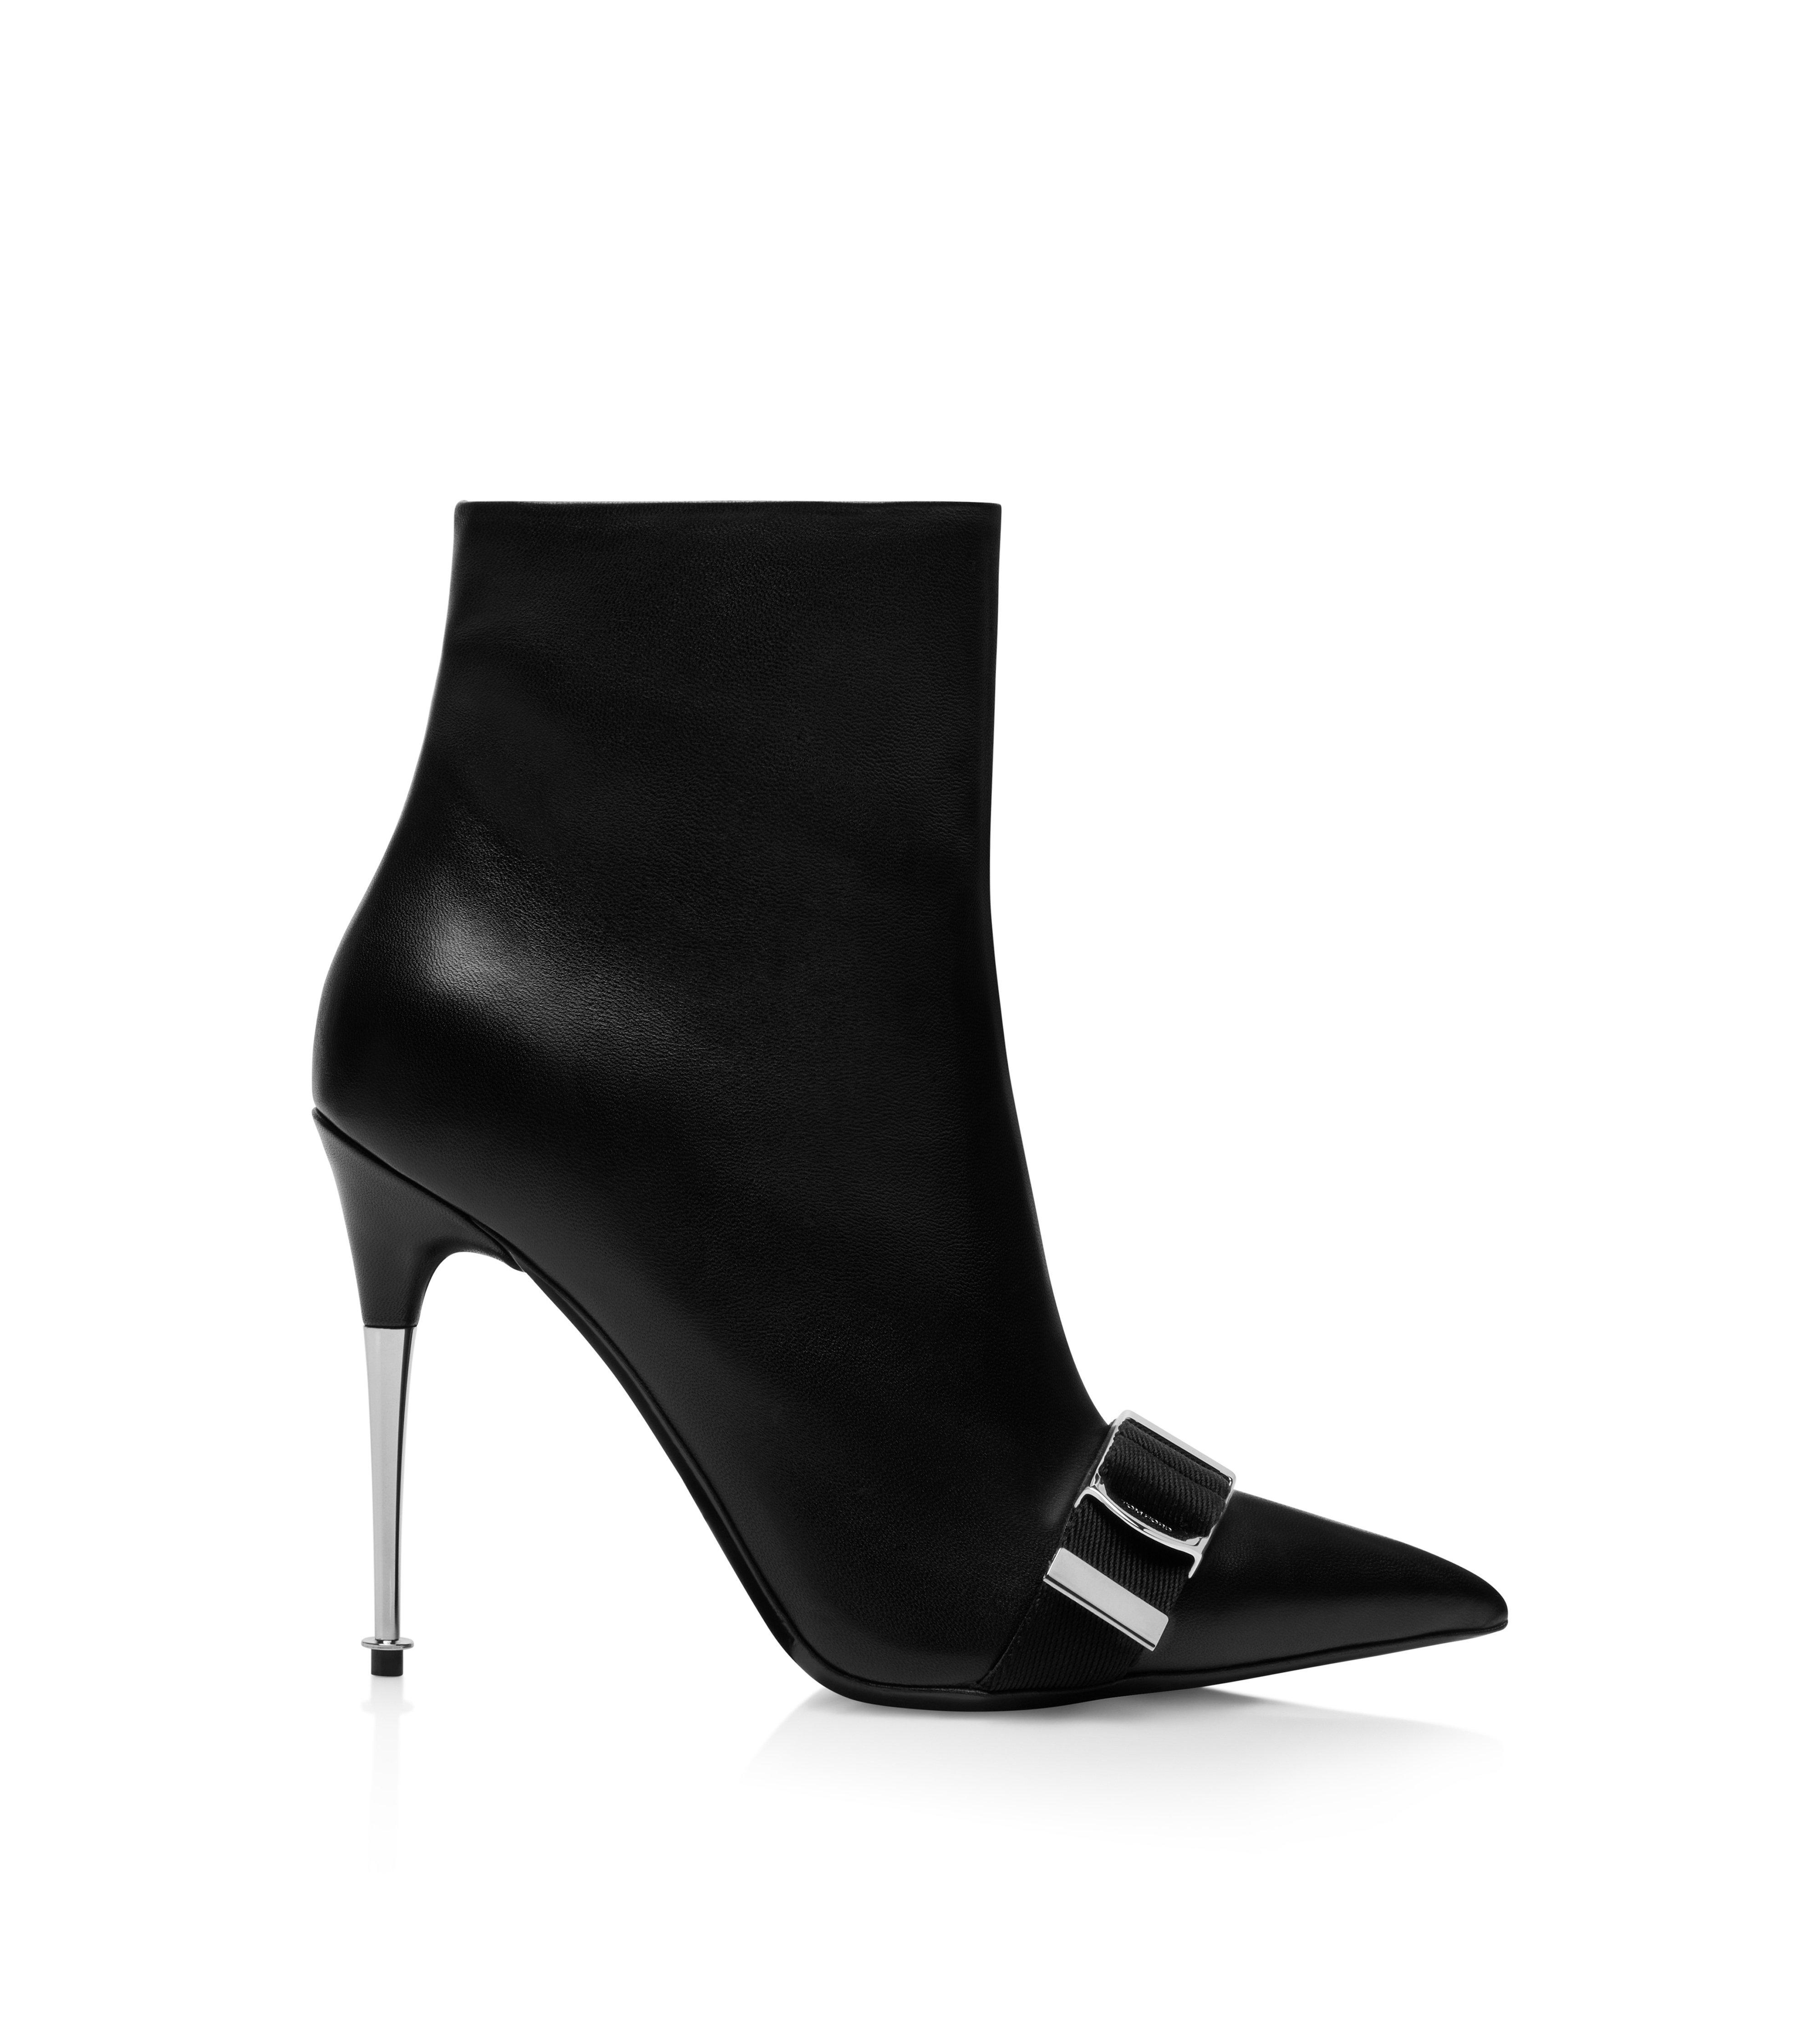 Boots - Women's Shoes | TomFord.com